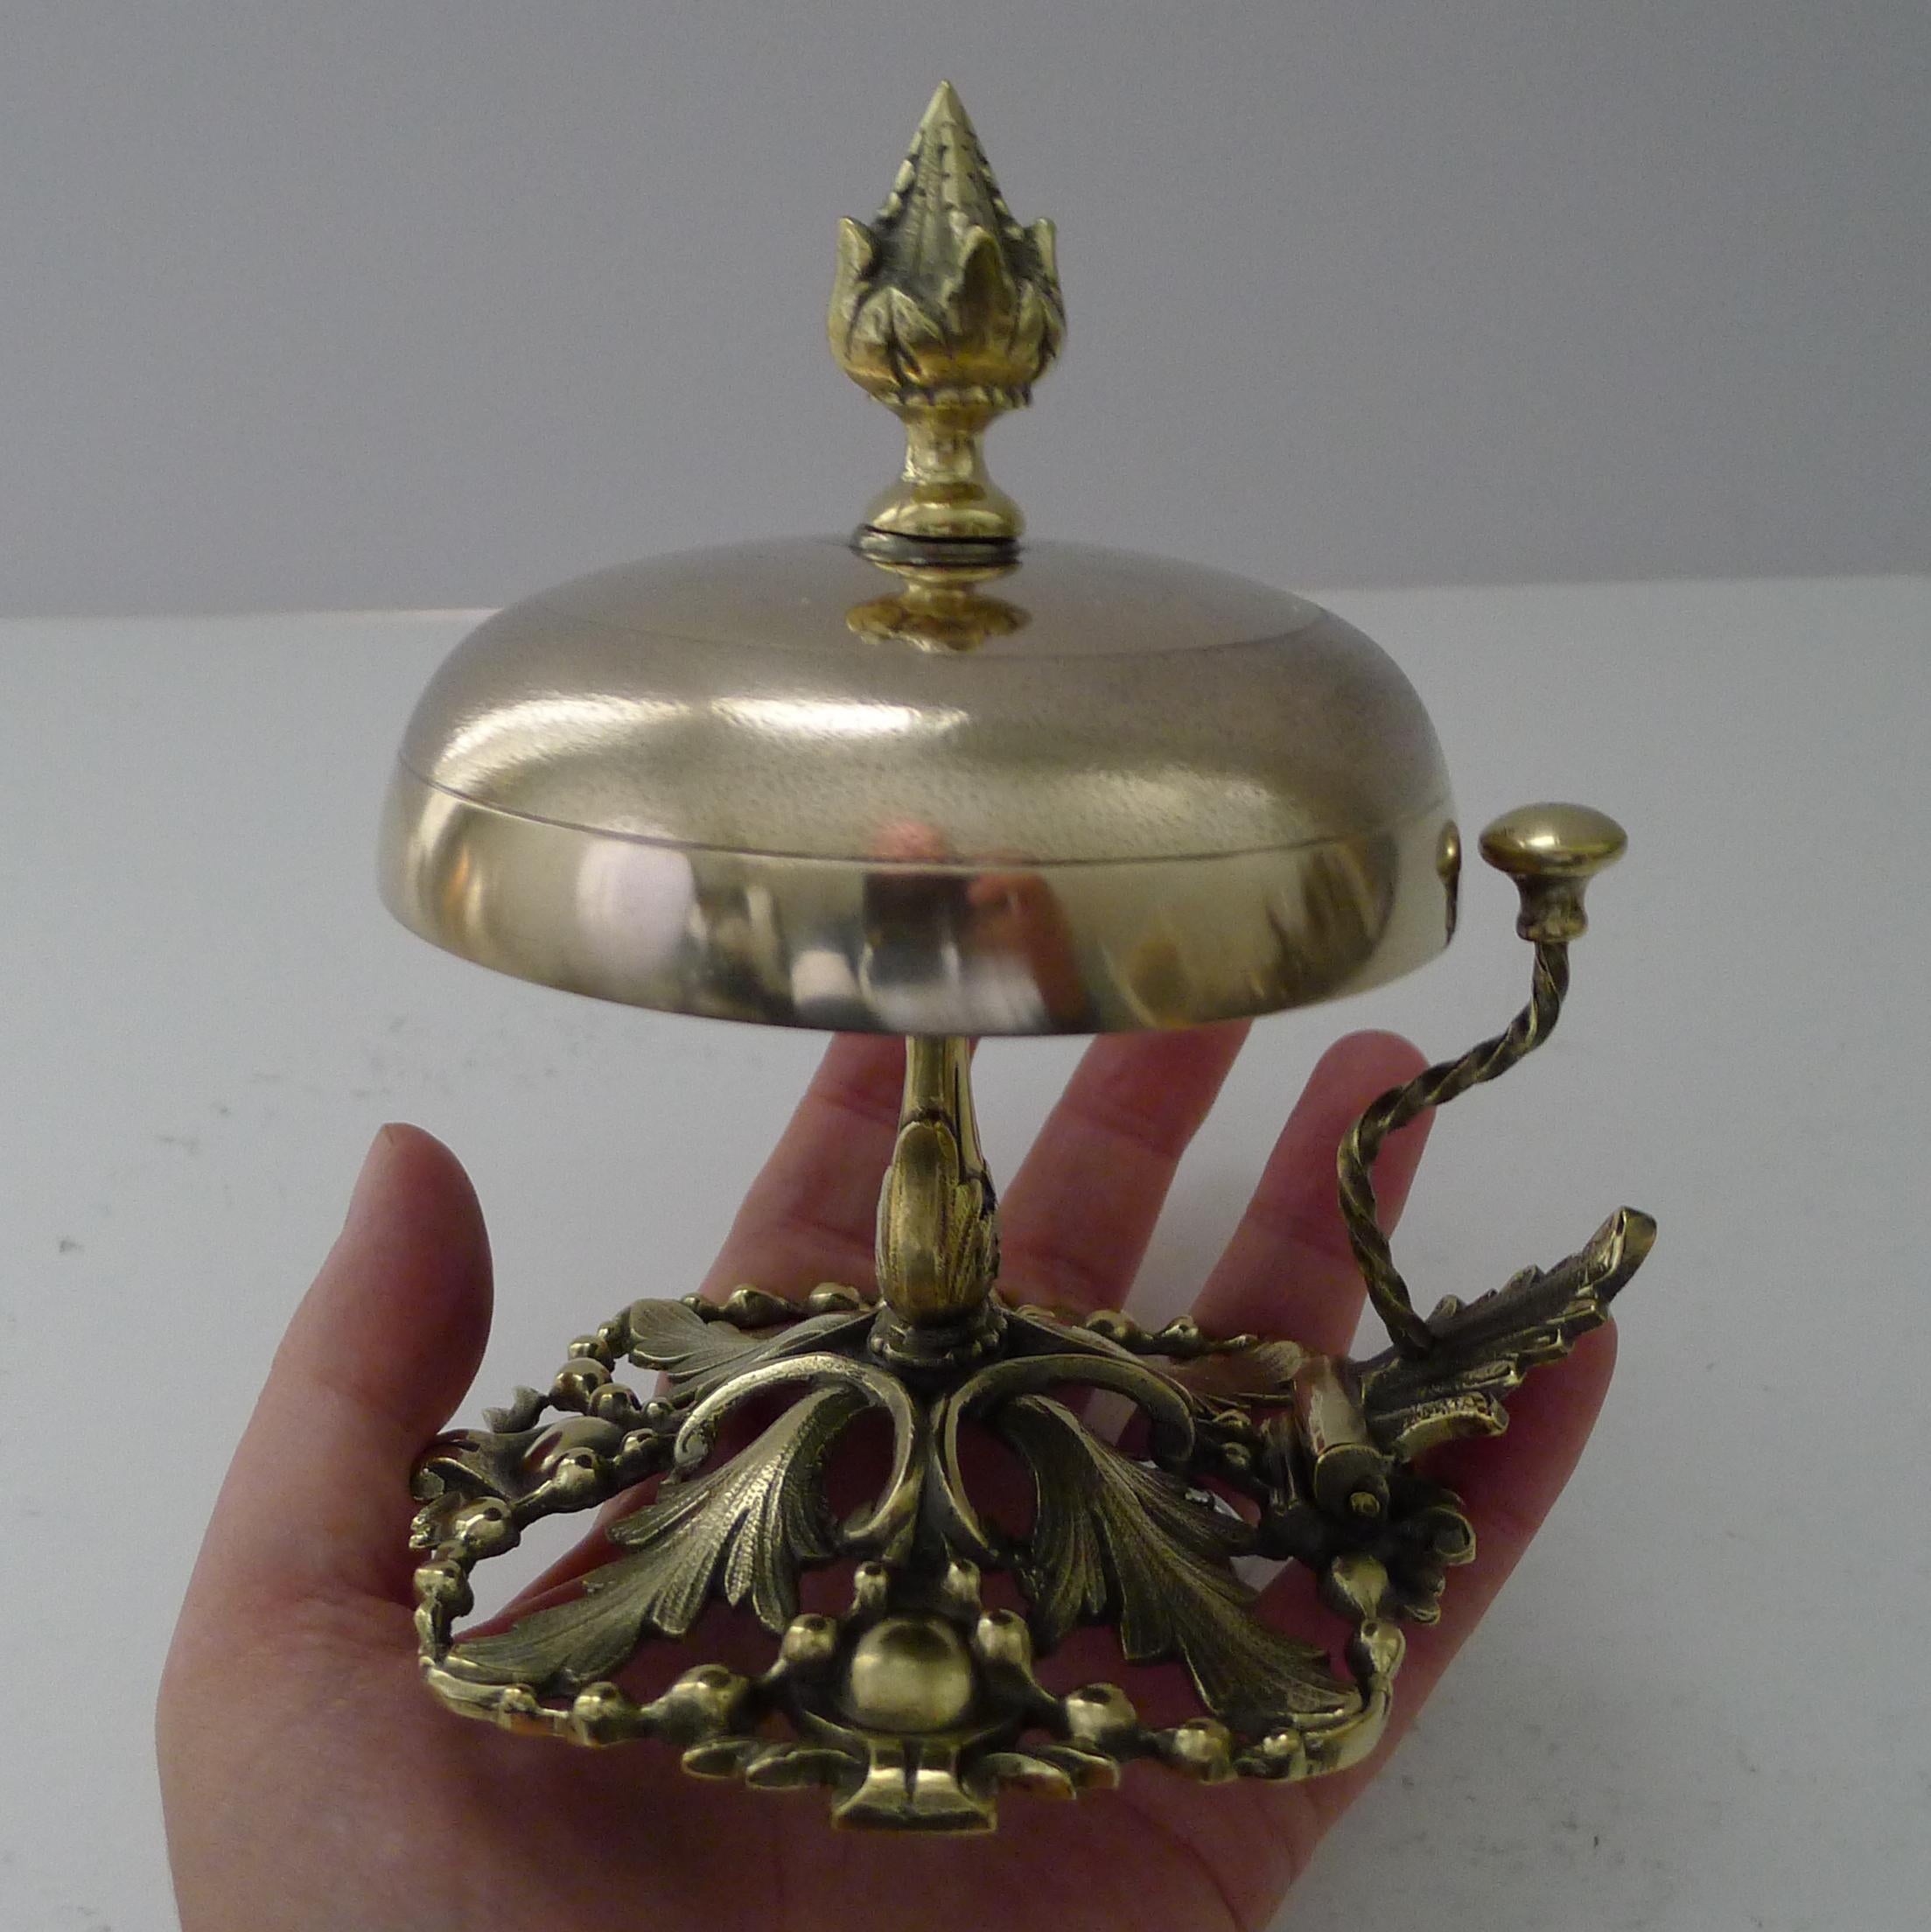 A wonderful and highly decorative desk or counter bell, my favourite kind with the more unusual clapper to the side rather than the ones you ring from the top. The hinged clapper is released and gives a clear and authoritative ring.

The reticulated